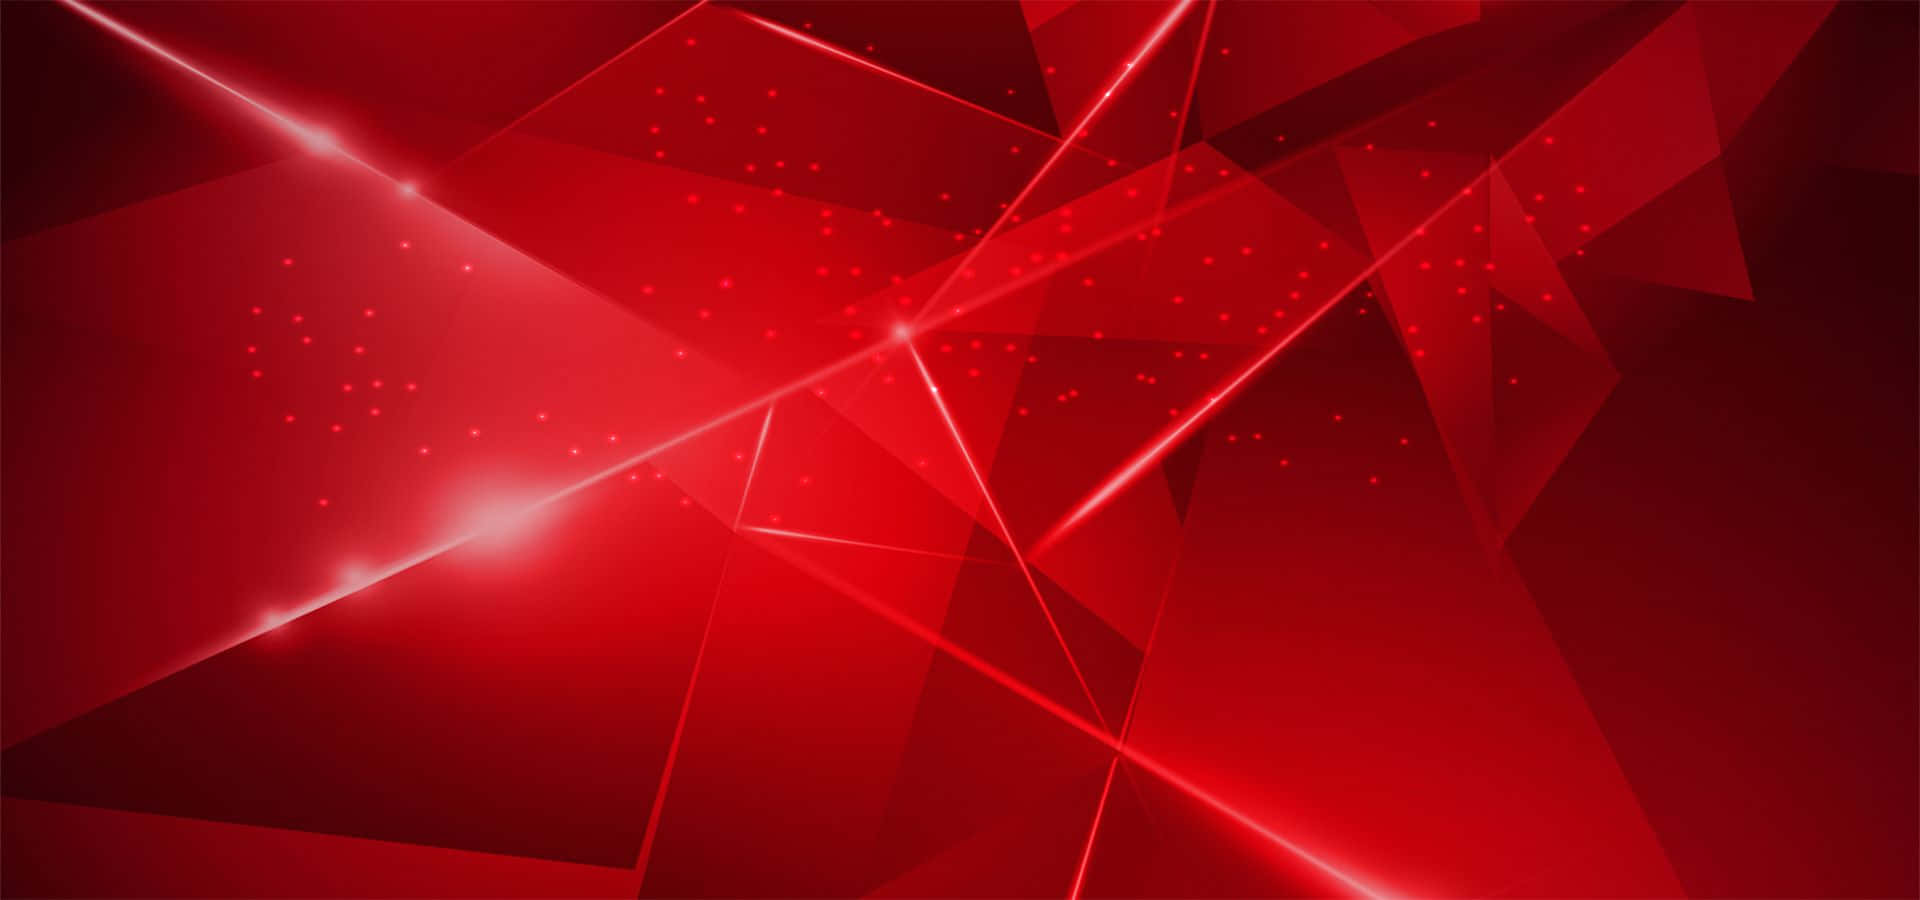 Download Geometric Red Aesthetic Banner Background | Wallpapers.com